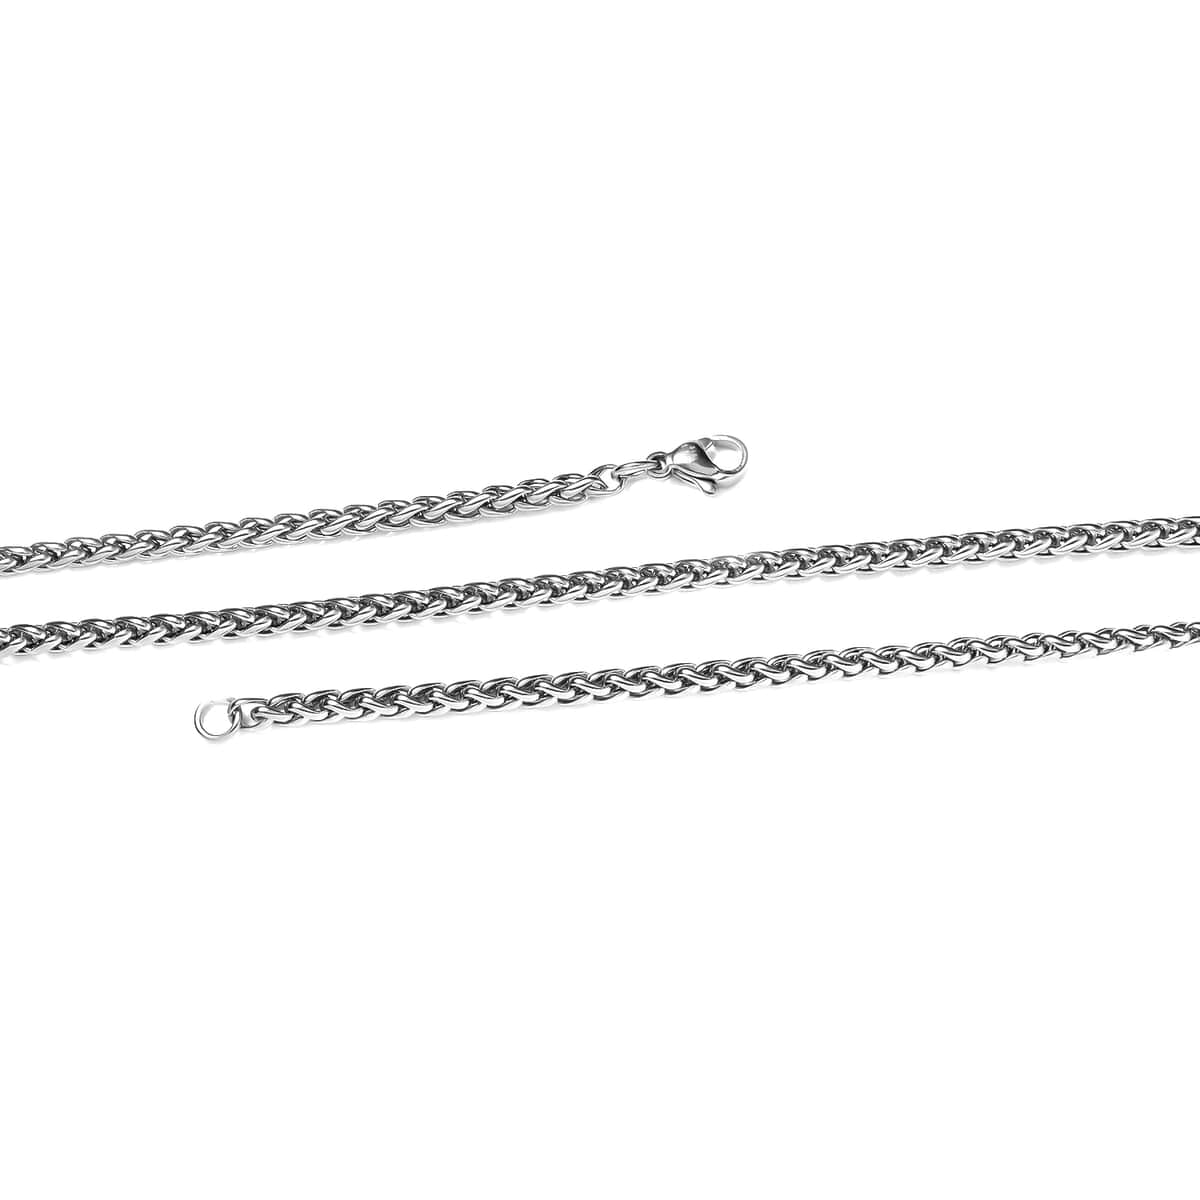 Set of 7, Beads, Wheat and Long Short Link Chain 3pcs Necklace 20 Inches, 3pcs Bracelet (7.5-8.0In) and 1pc Magnetic Lock in Stainless Steel image number 2